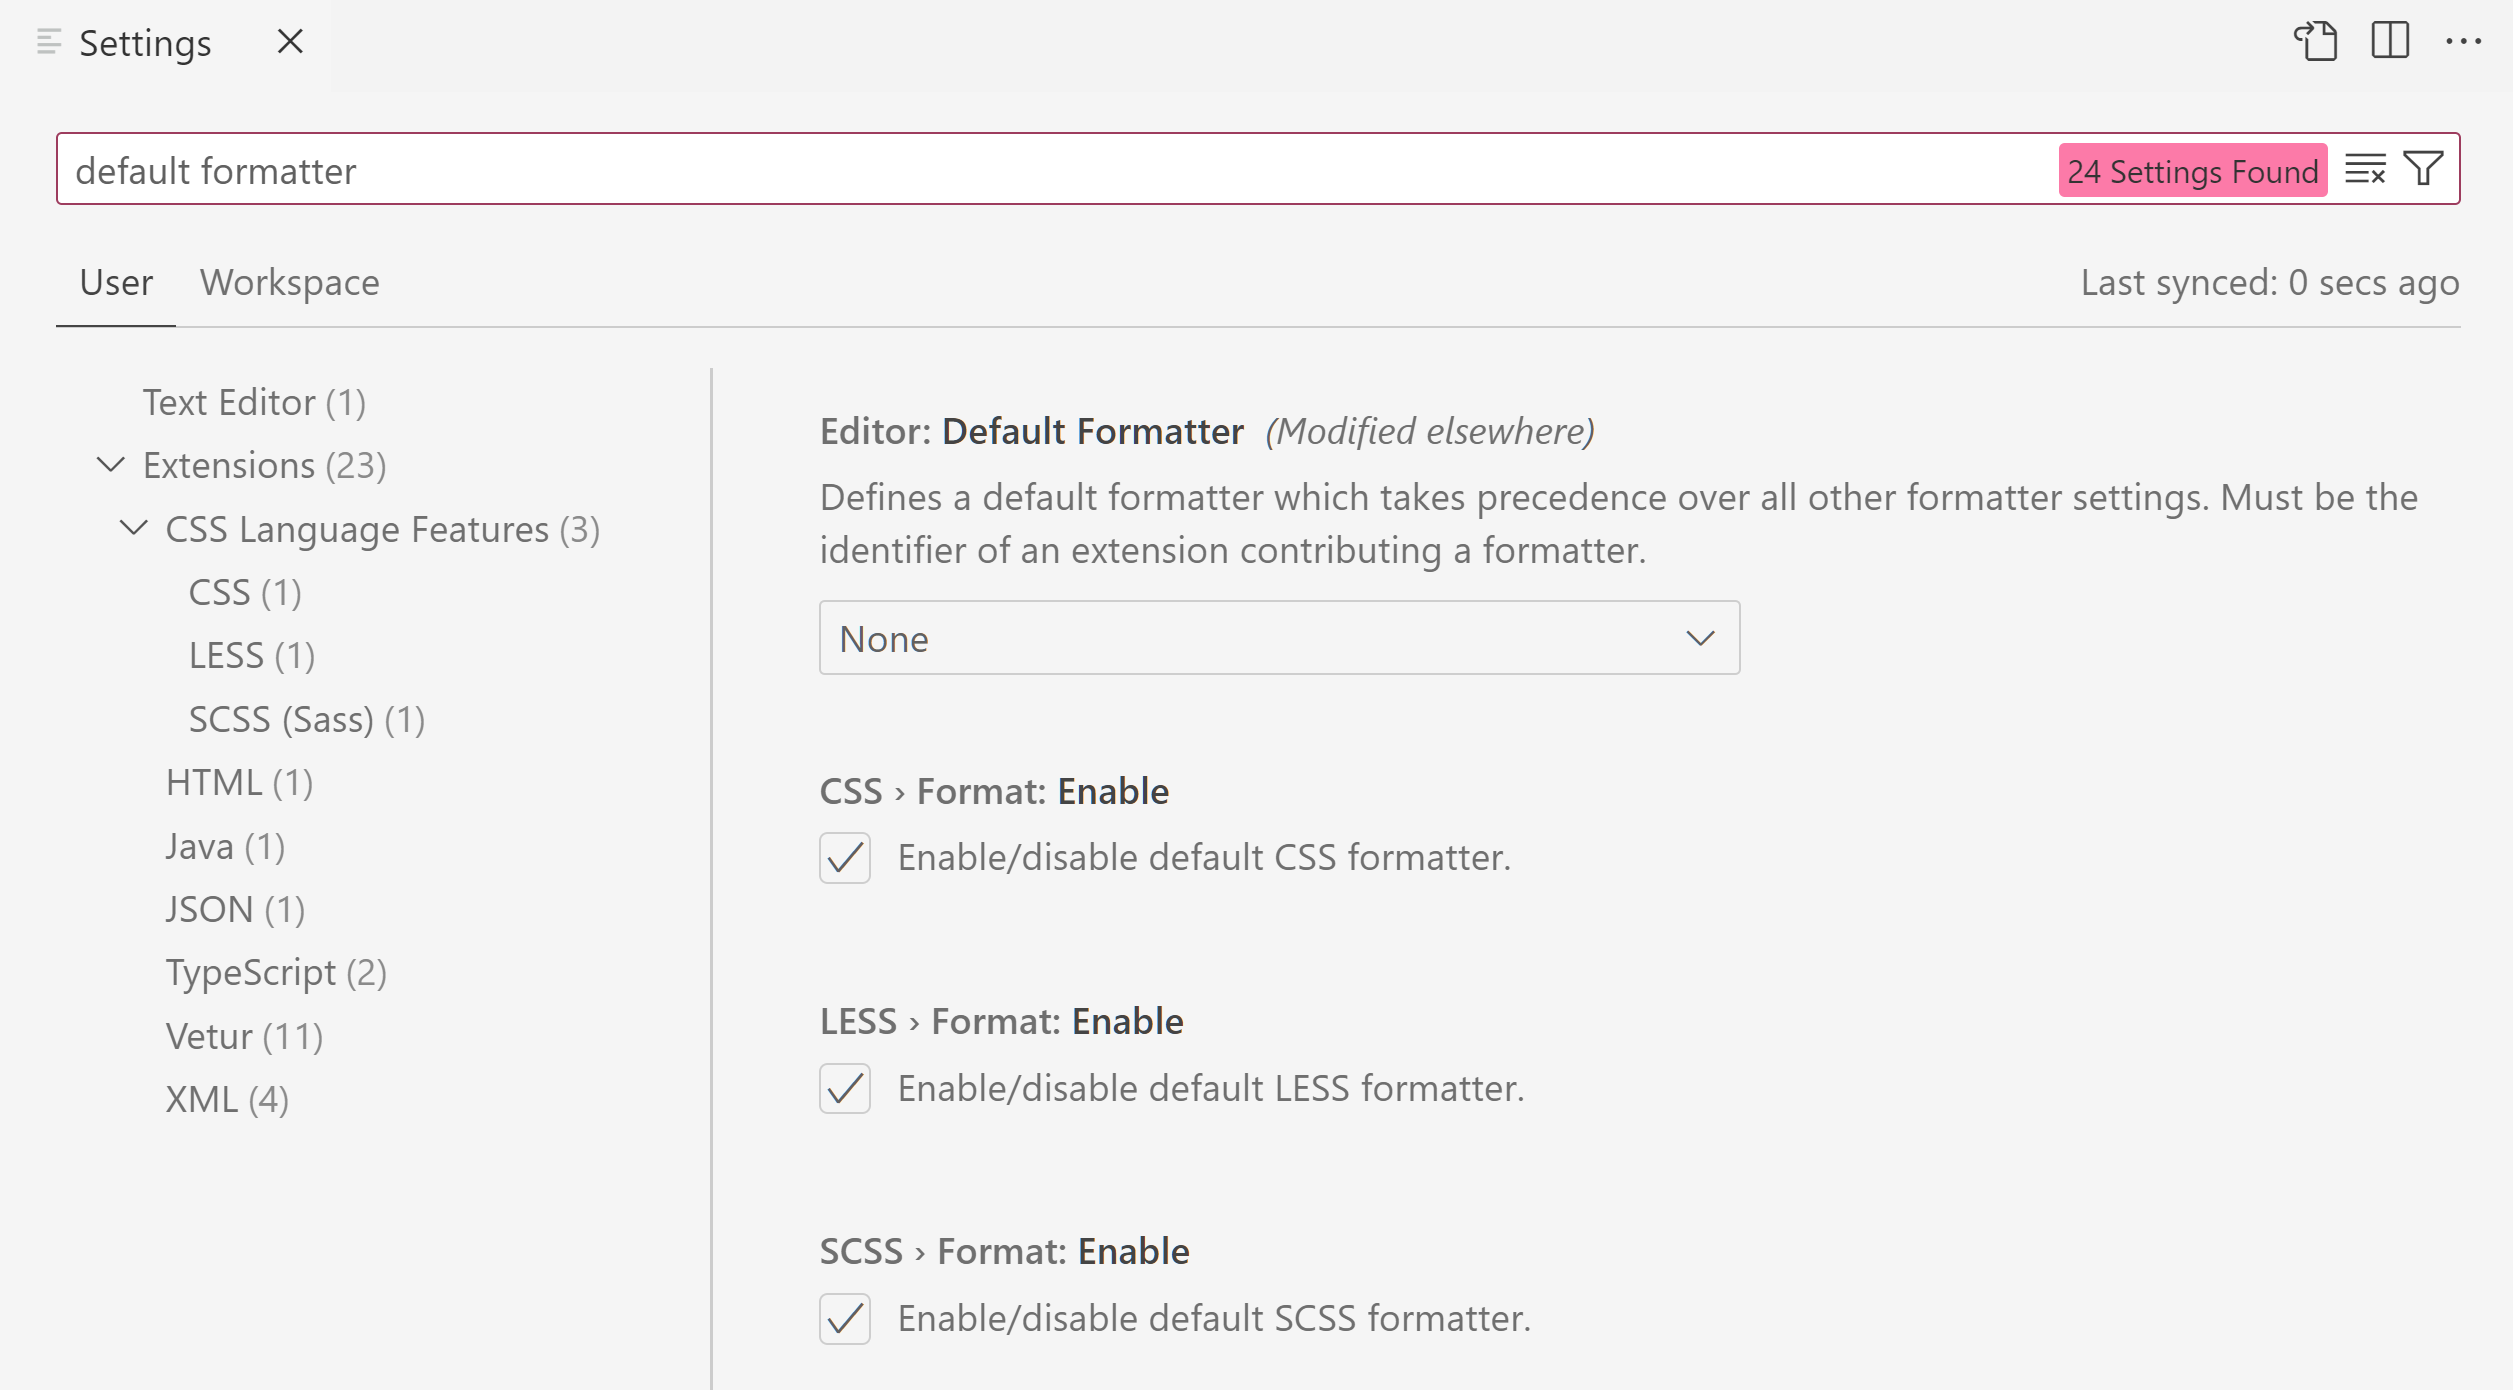 Searching "default formatter" in the Settings editor results in the editor.defaultFormatter setting appearing at the top.